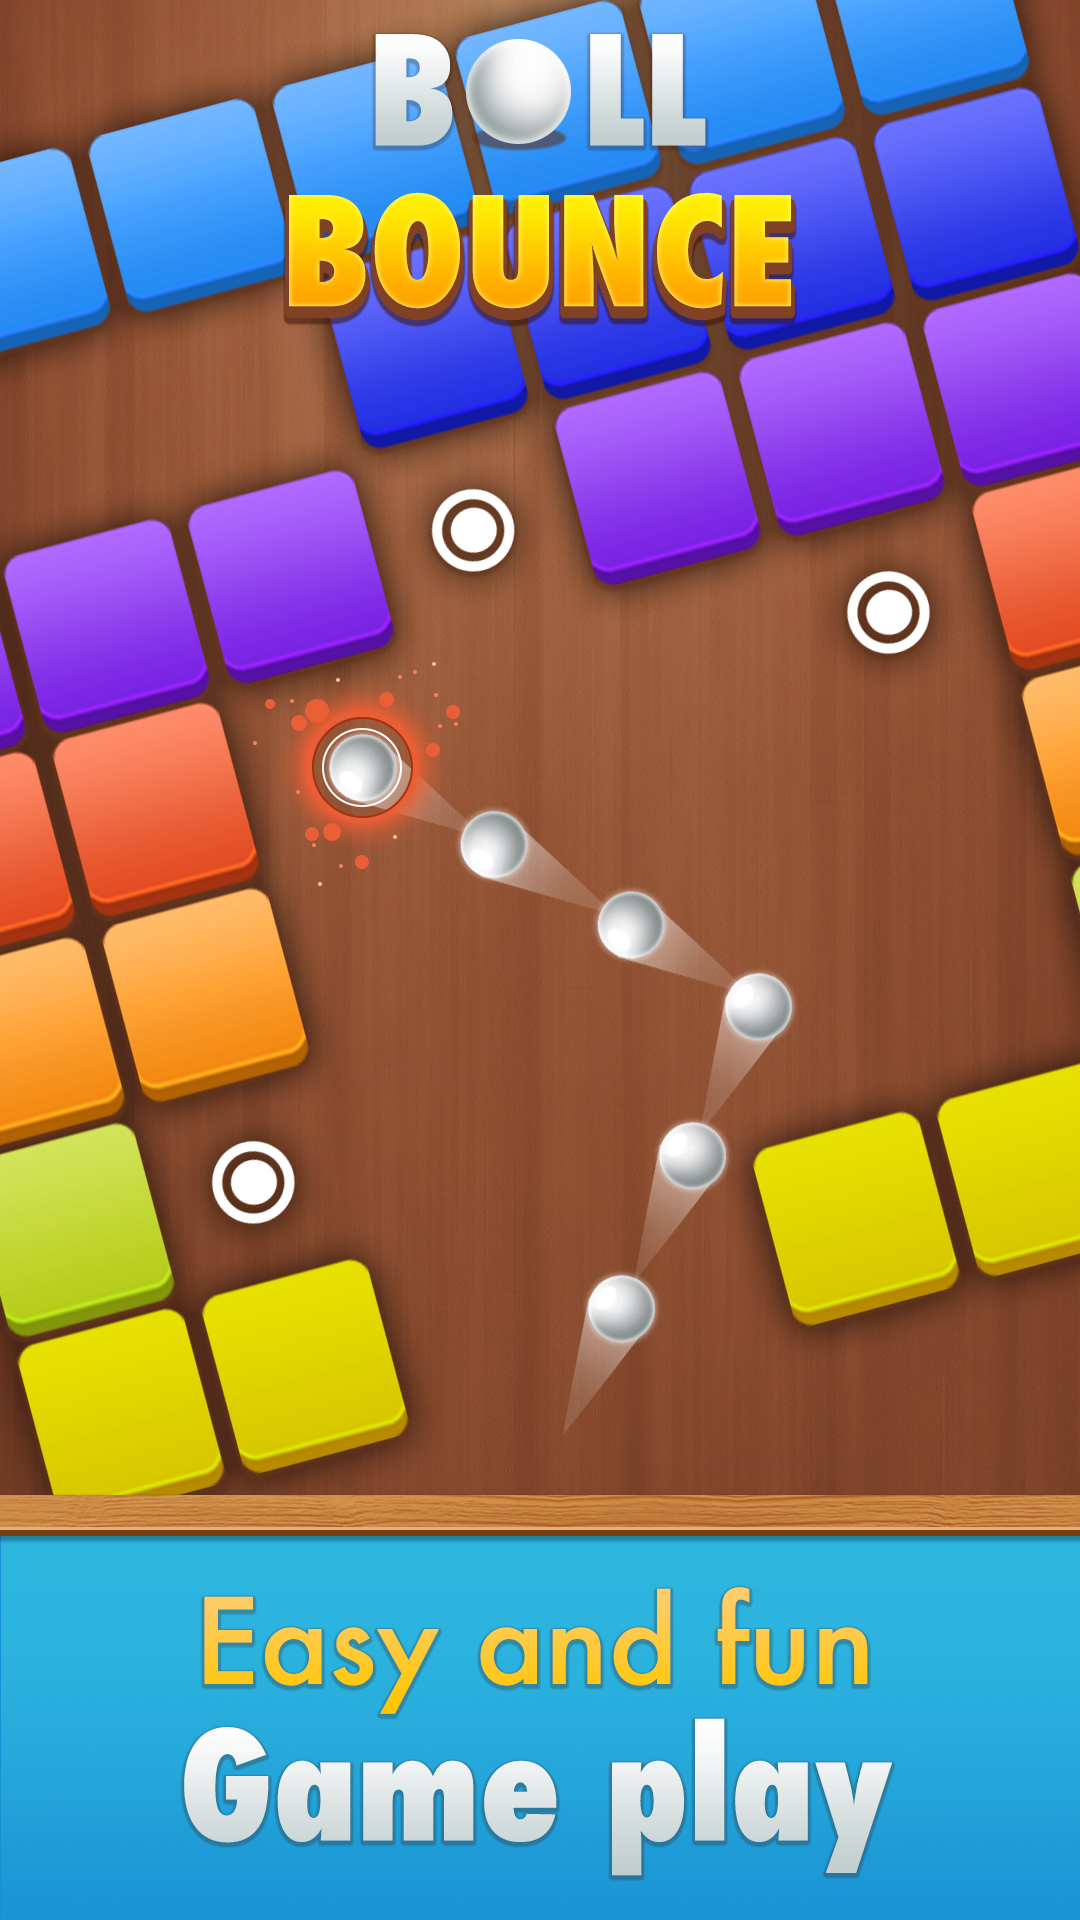 Checkers Clash: Online Game for Android - Free App Download